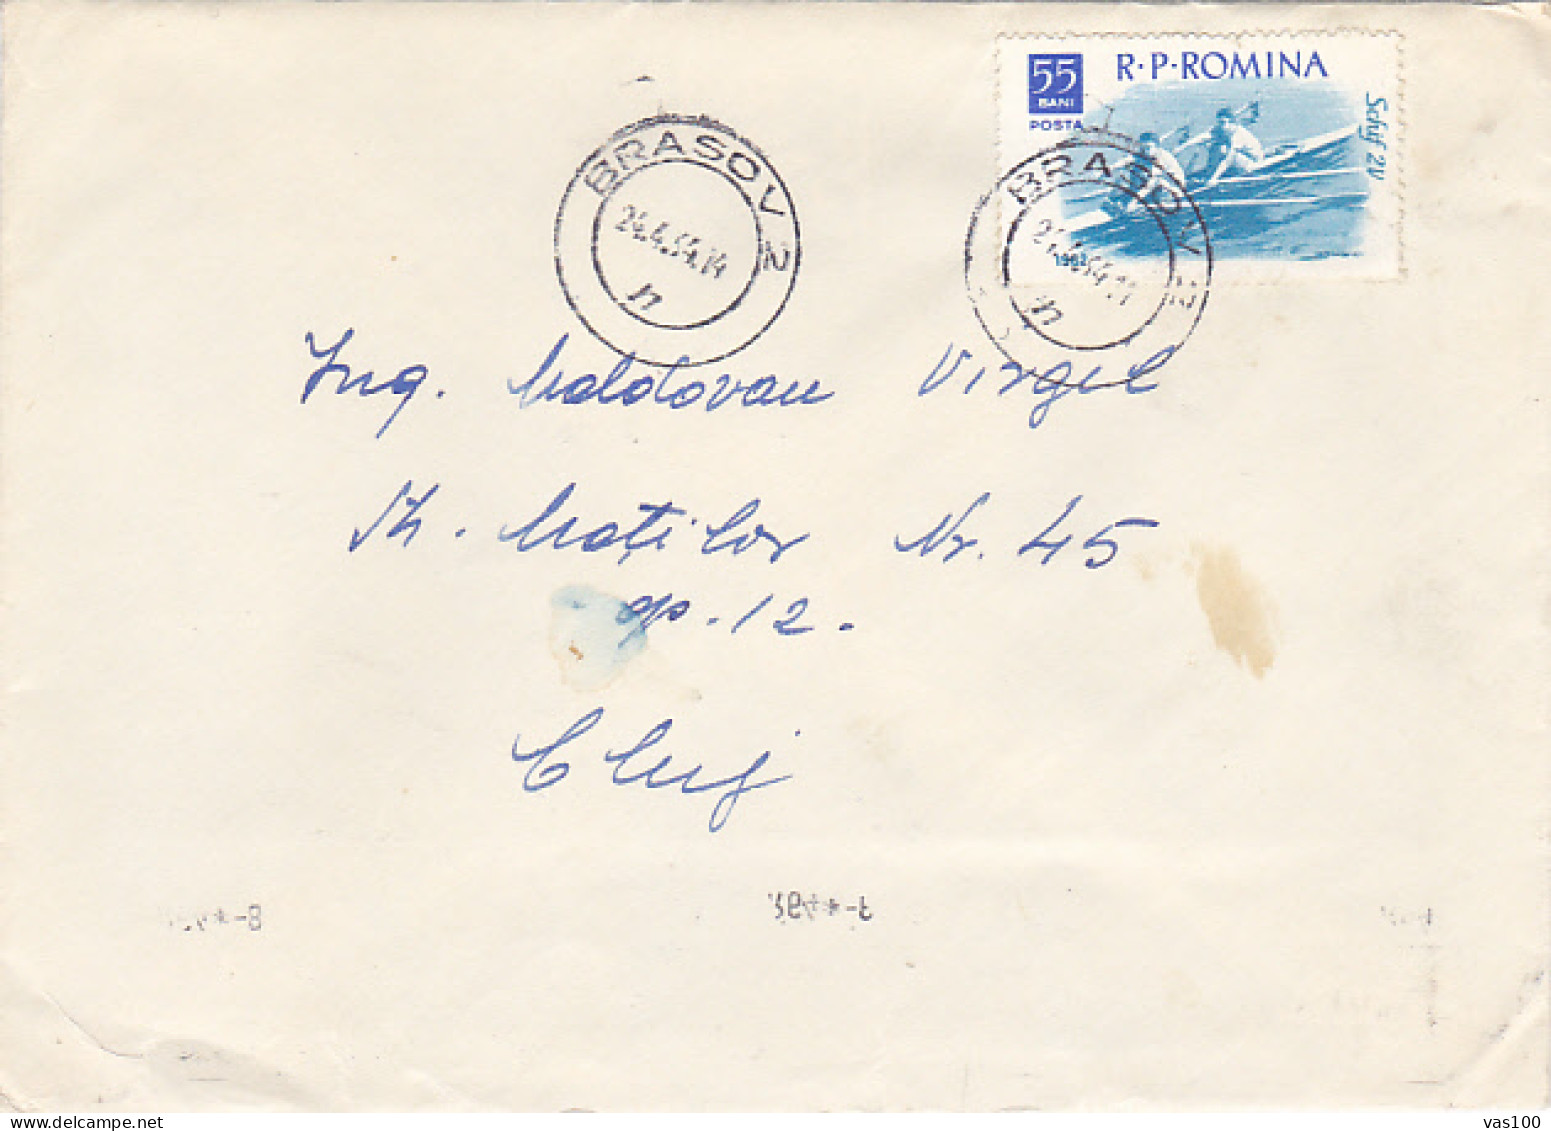 ROWING, TEAM OF 2, STAMP ON COVER, 1964, ROMANIA - Storia Postale